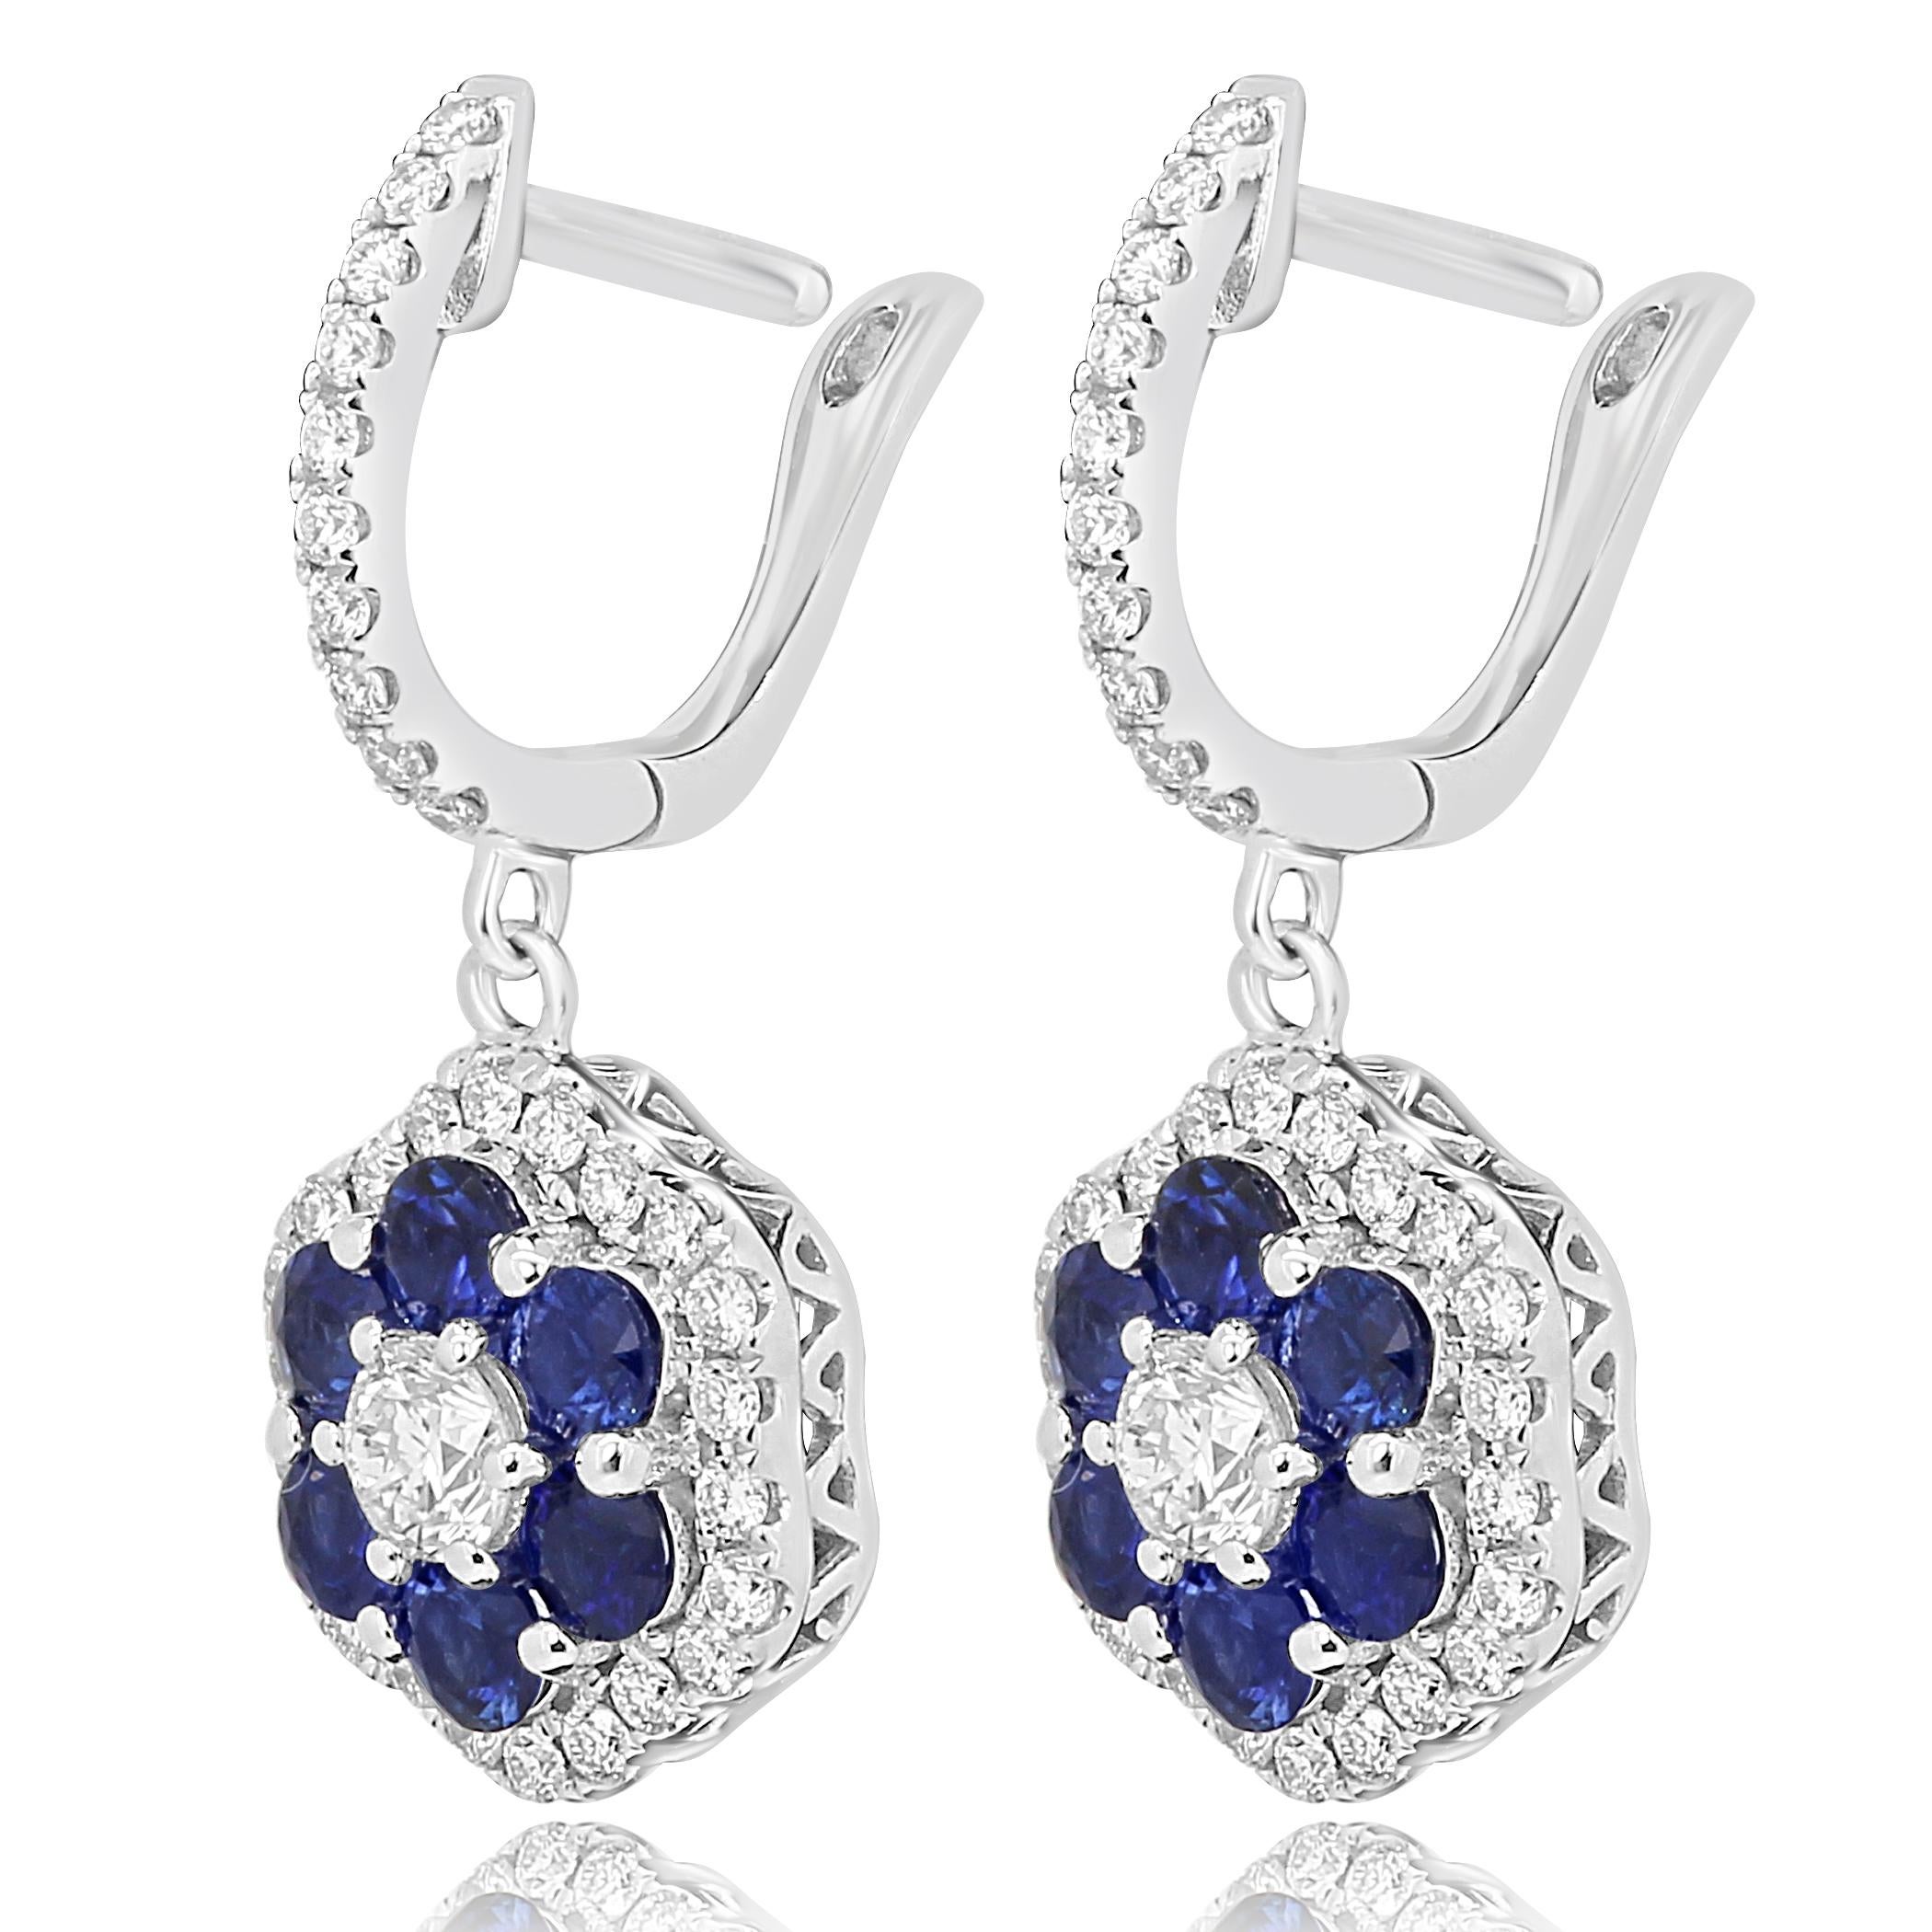 12 Blue Sapphire Round in Cluster Setting 1.50 Carat encircled in a Single Halo of White Diamond 1.00  Carat in 14K Yellow and White Gold Earring.

Style available in different price ranges. Prices are based on your selection of 4C's i.e Cut, Color,